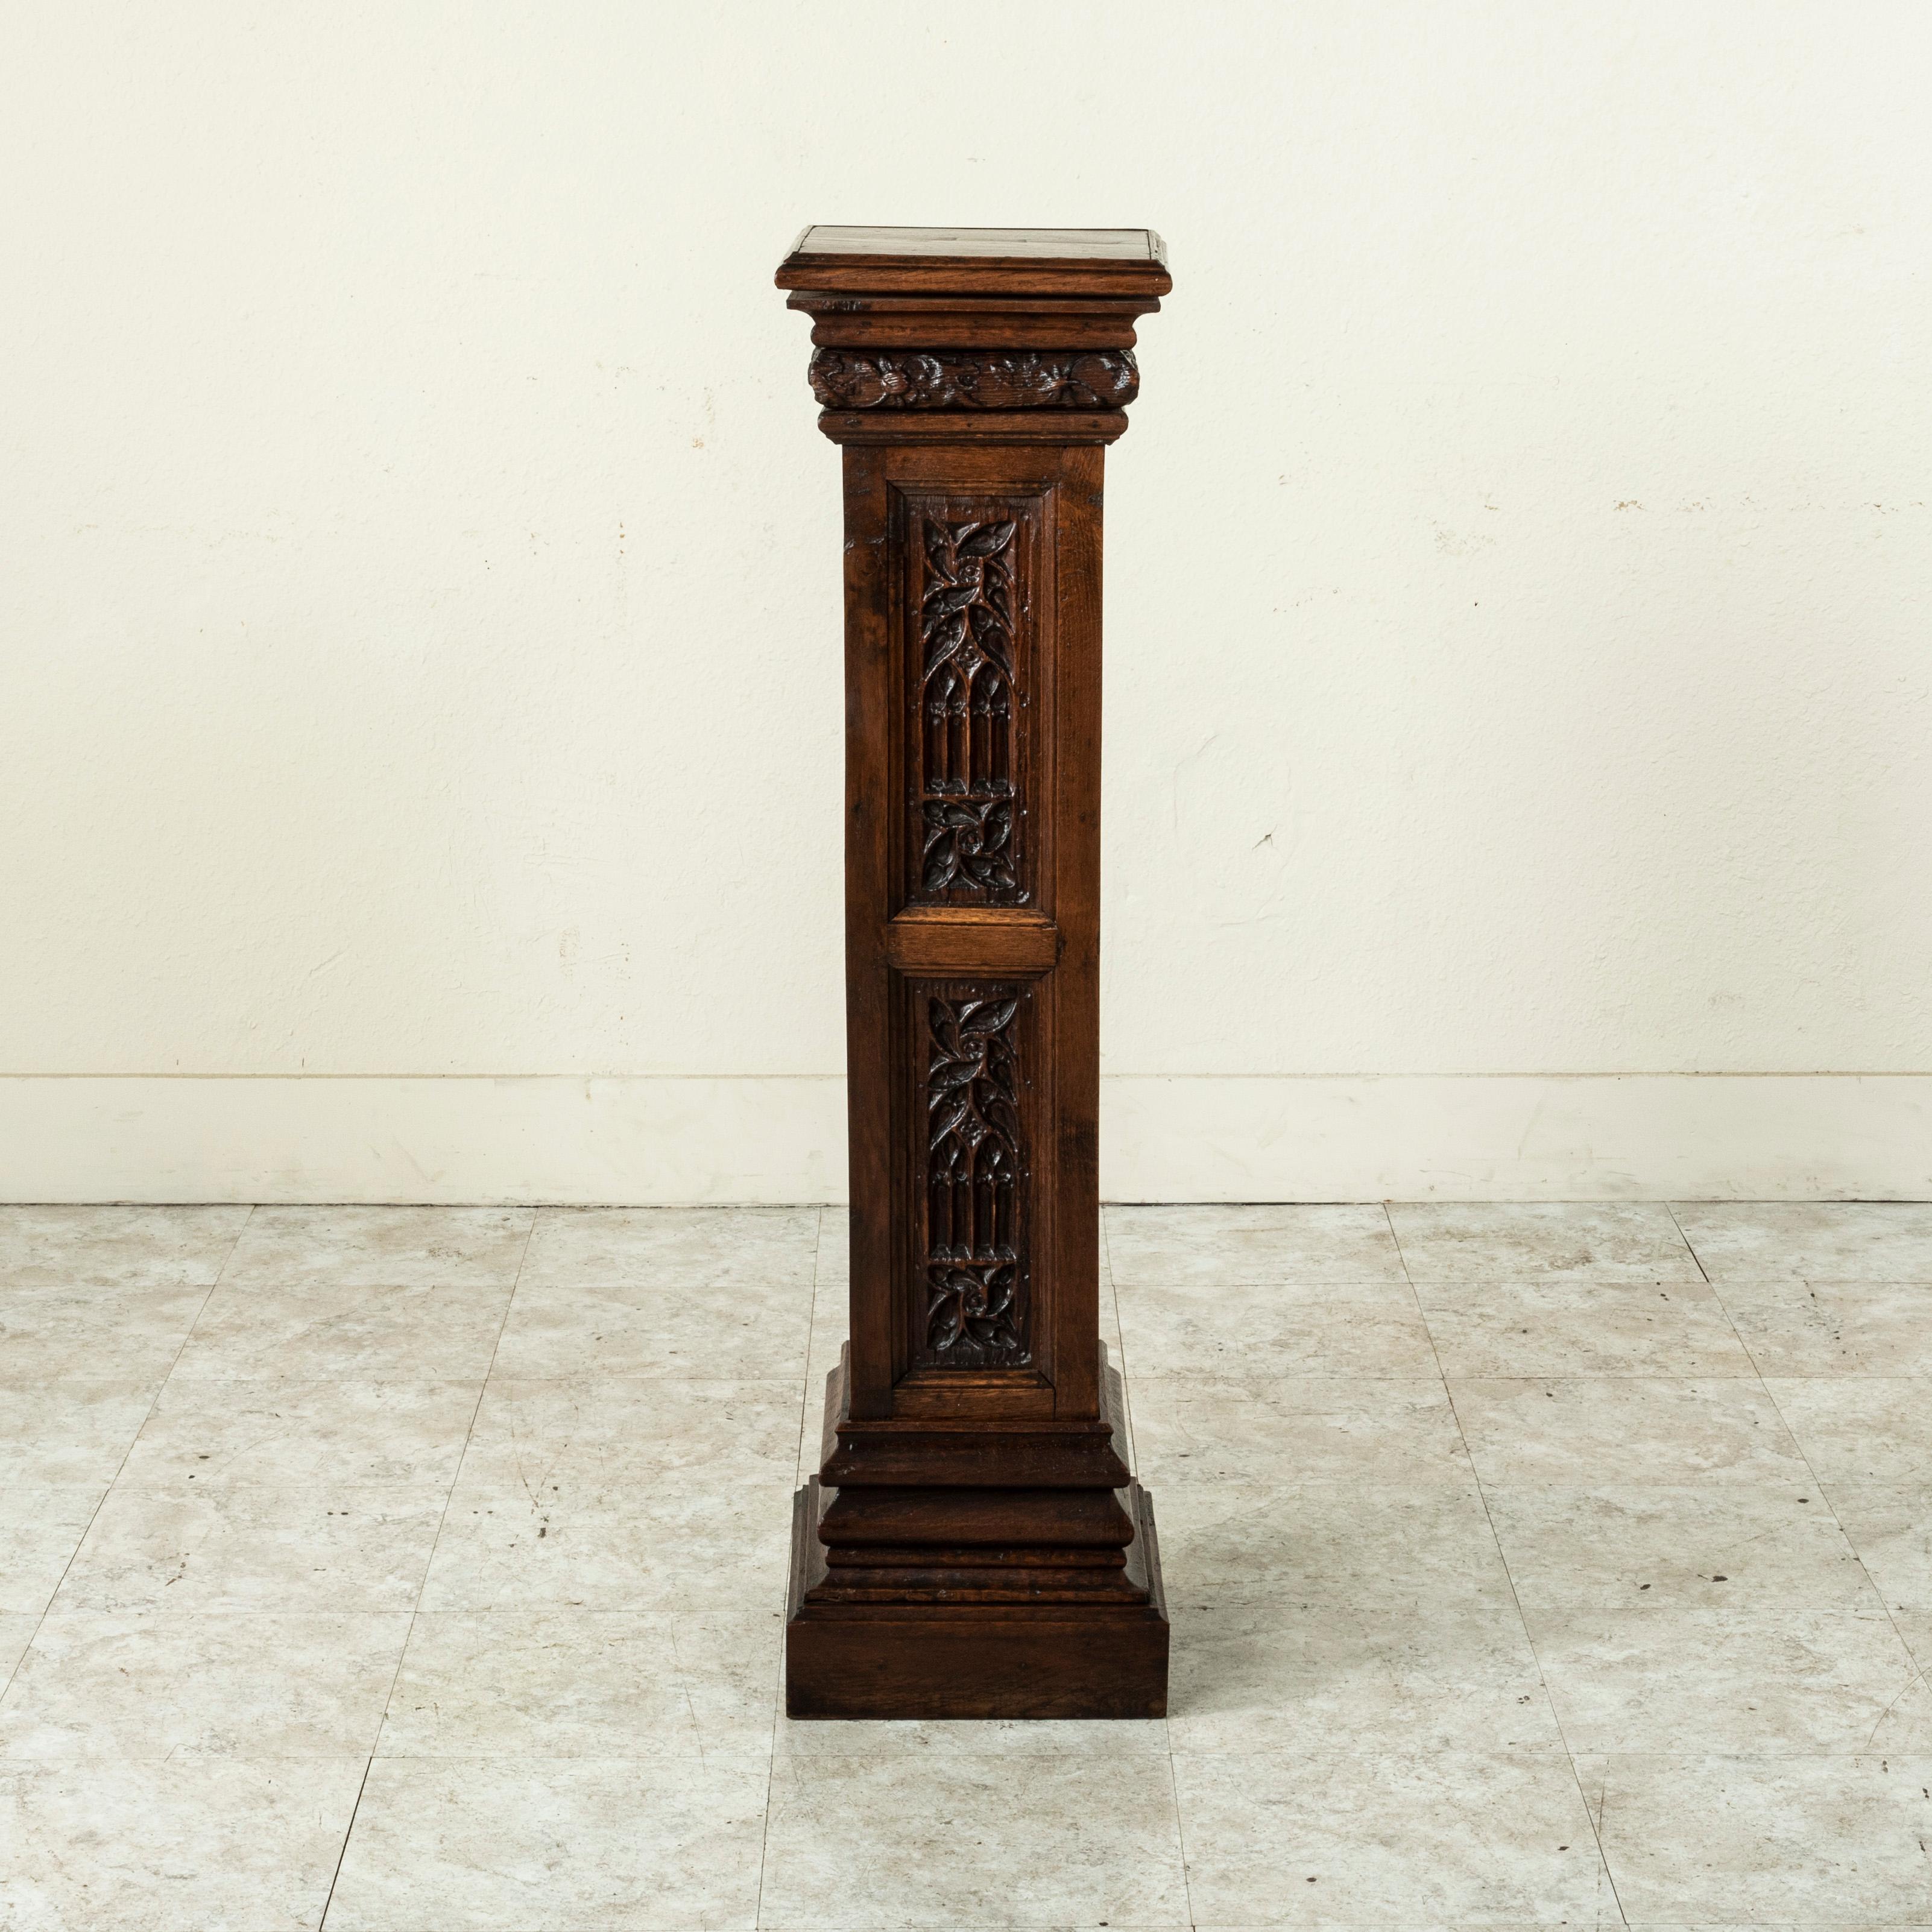 This late 19th century French Gothic style column, pedestal, or plant stand is constructed of solid oak. Hand carved panels on all four sides feature Classic Gothic arches and pinwheels. Below the square top are carved details of leaves and flowers.